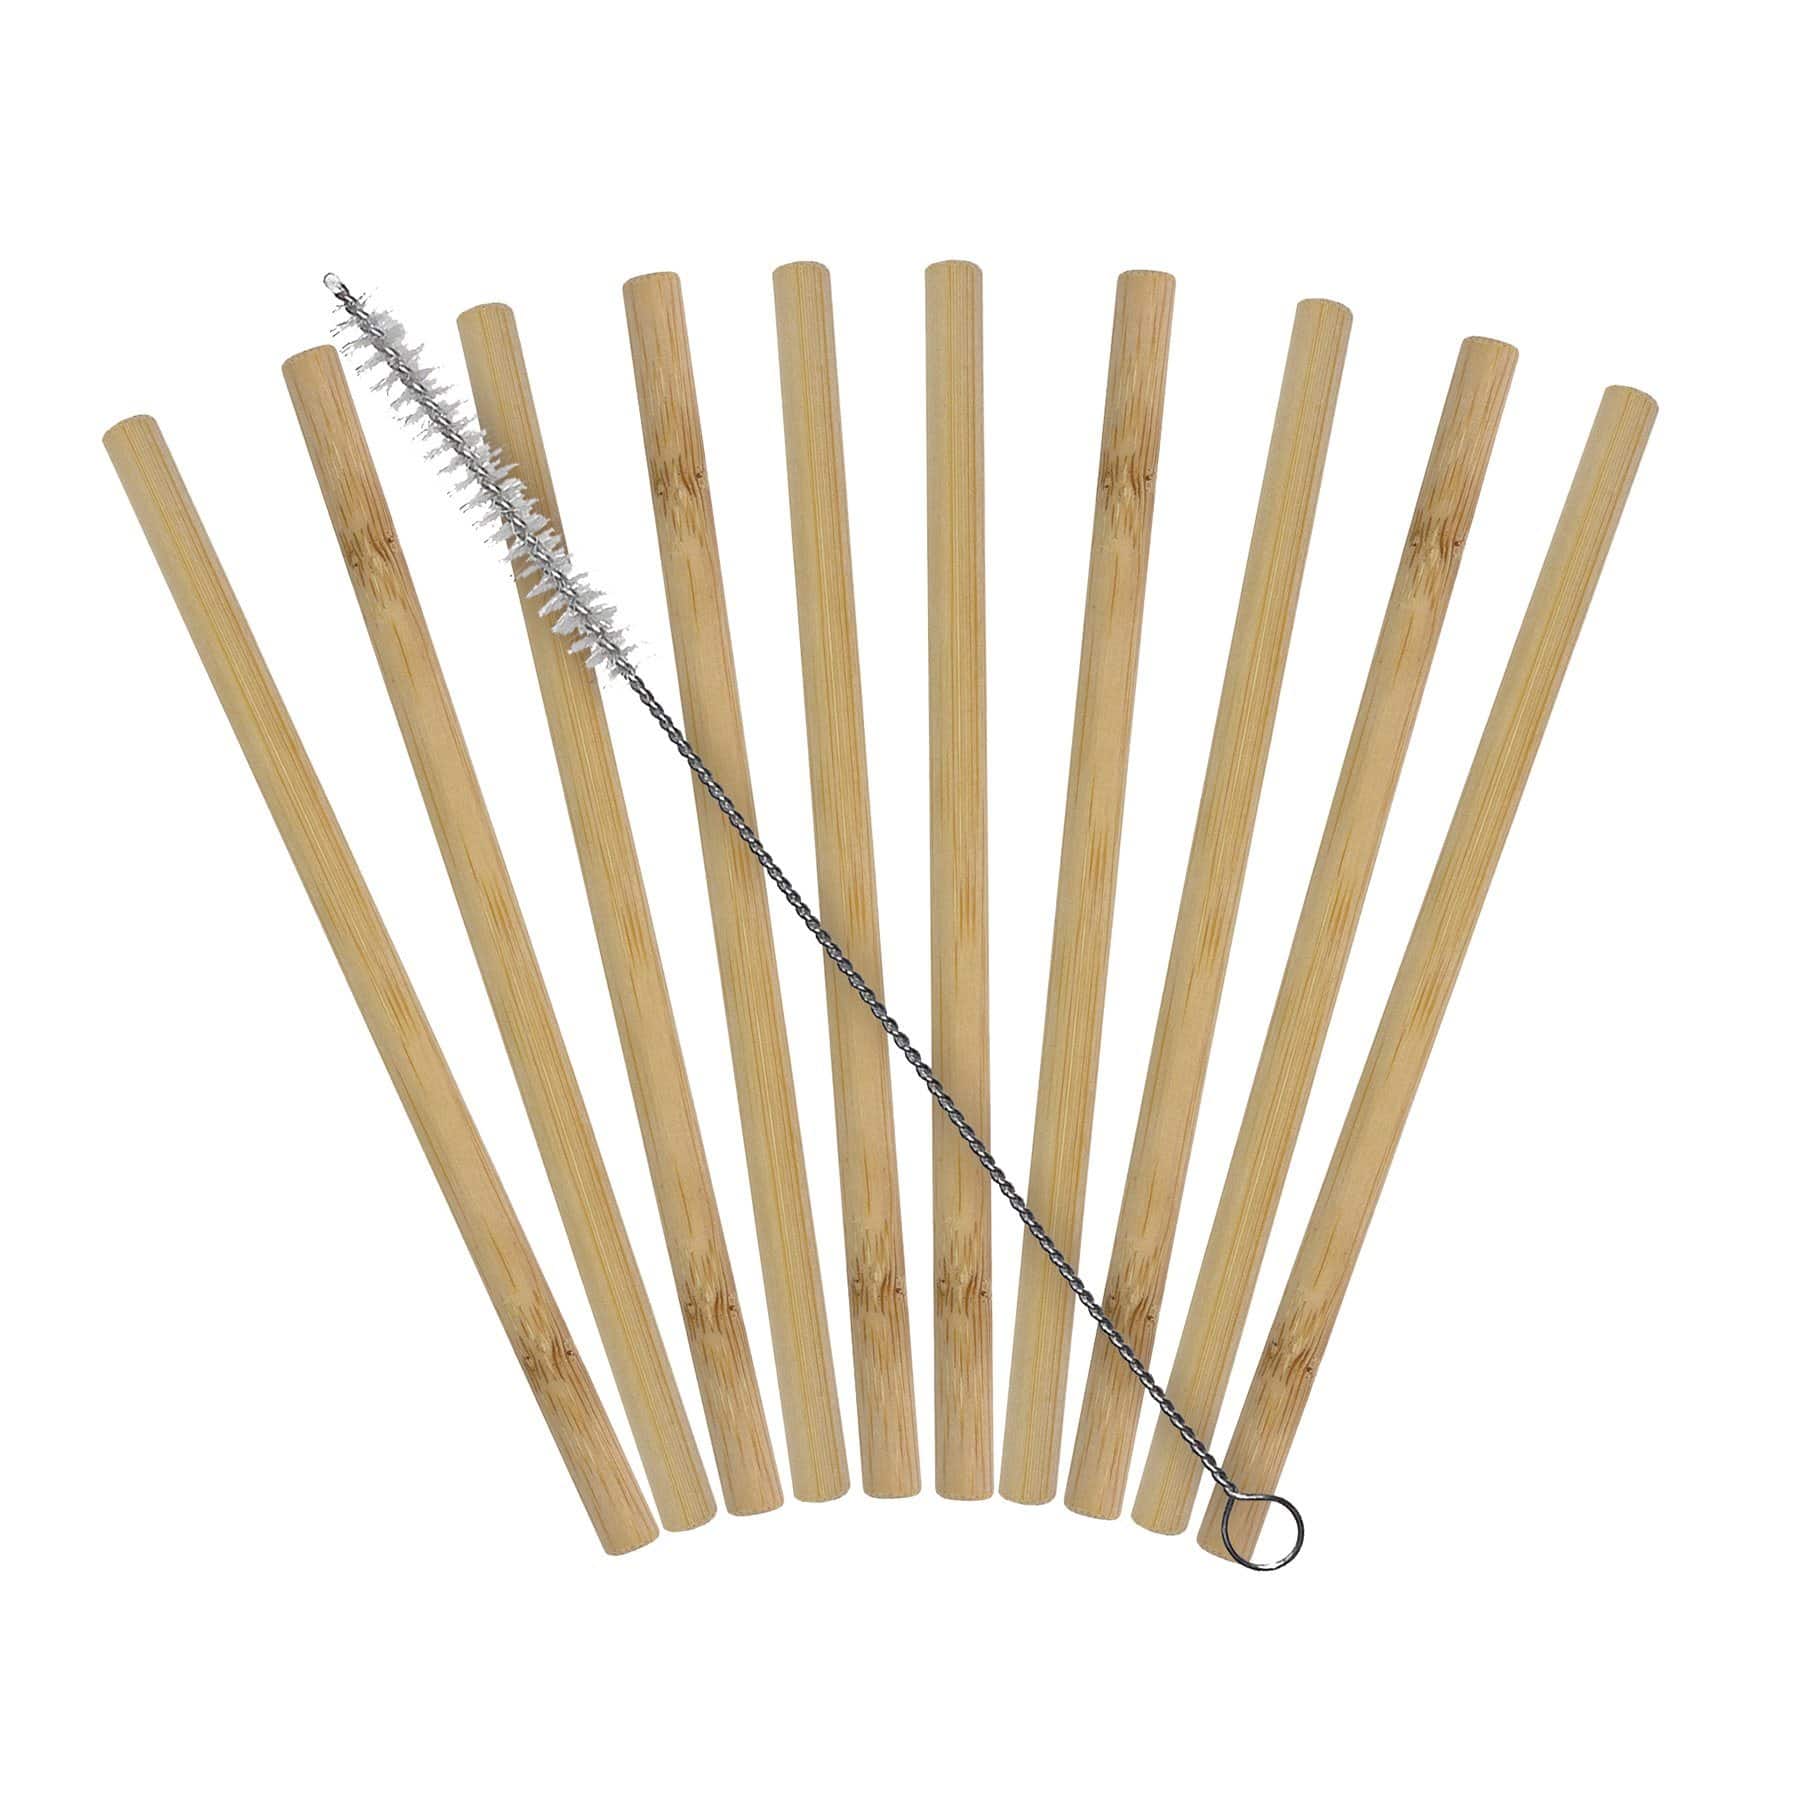 The Honolulu Straw 2-Pack Bamboo Straws with Silicone Tips